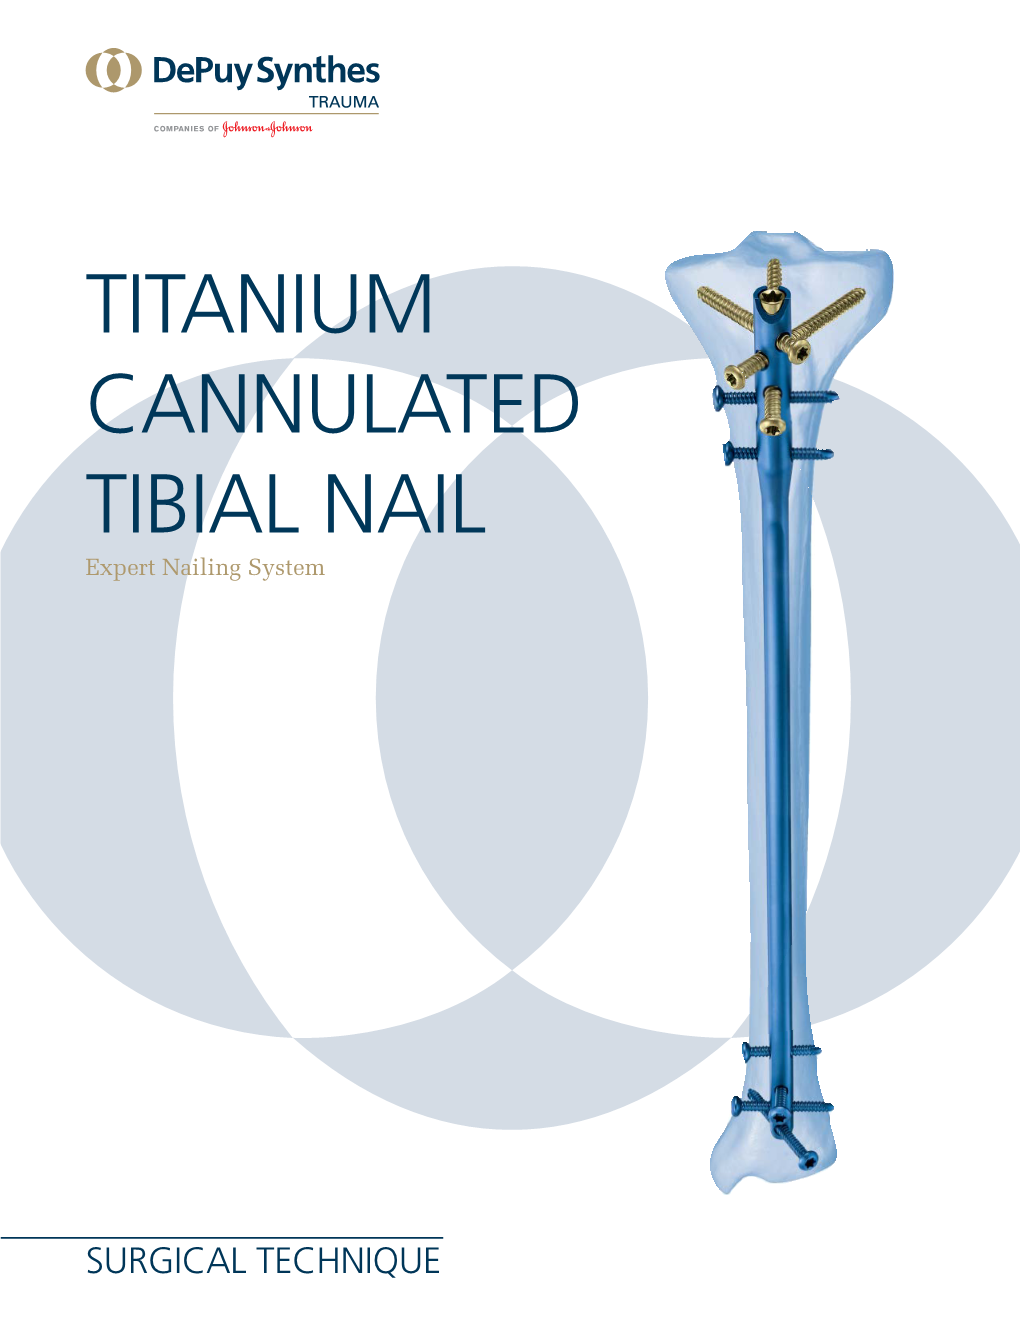 Titanium Cannulated Tibial Nail Expert Nailing System